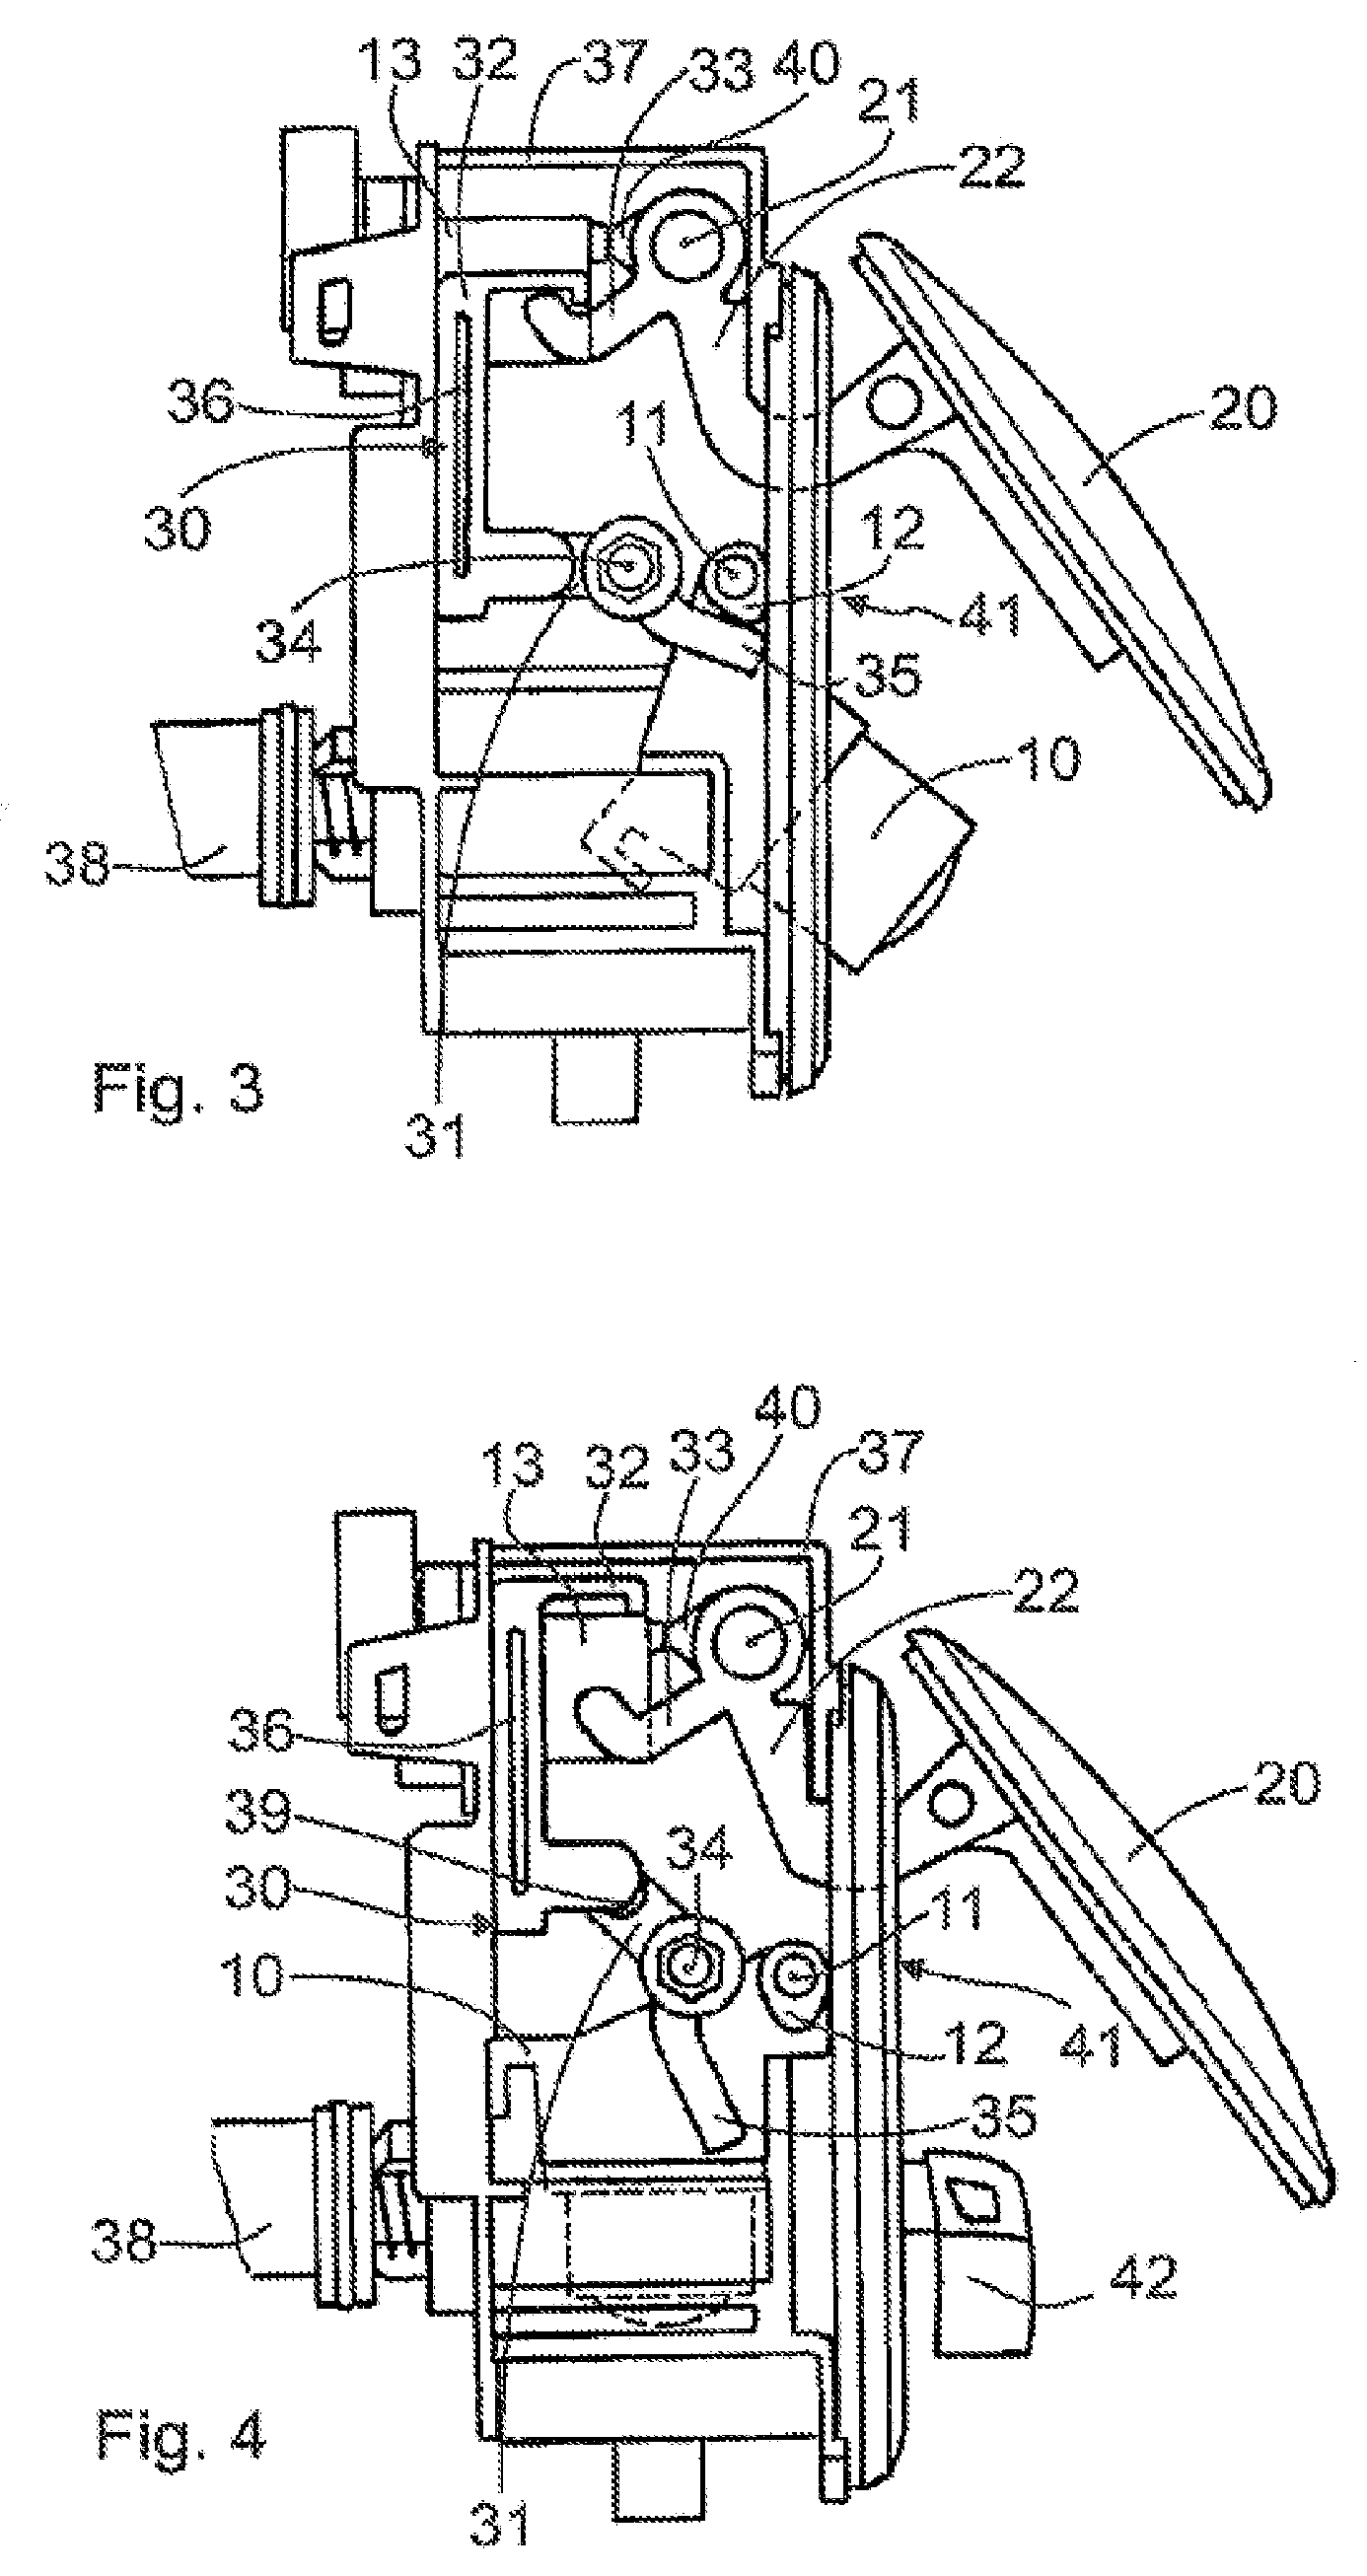 Device for a motor vehicle, comprising a rotatably mounted camera unit